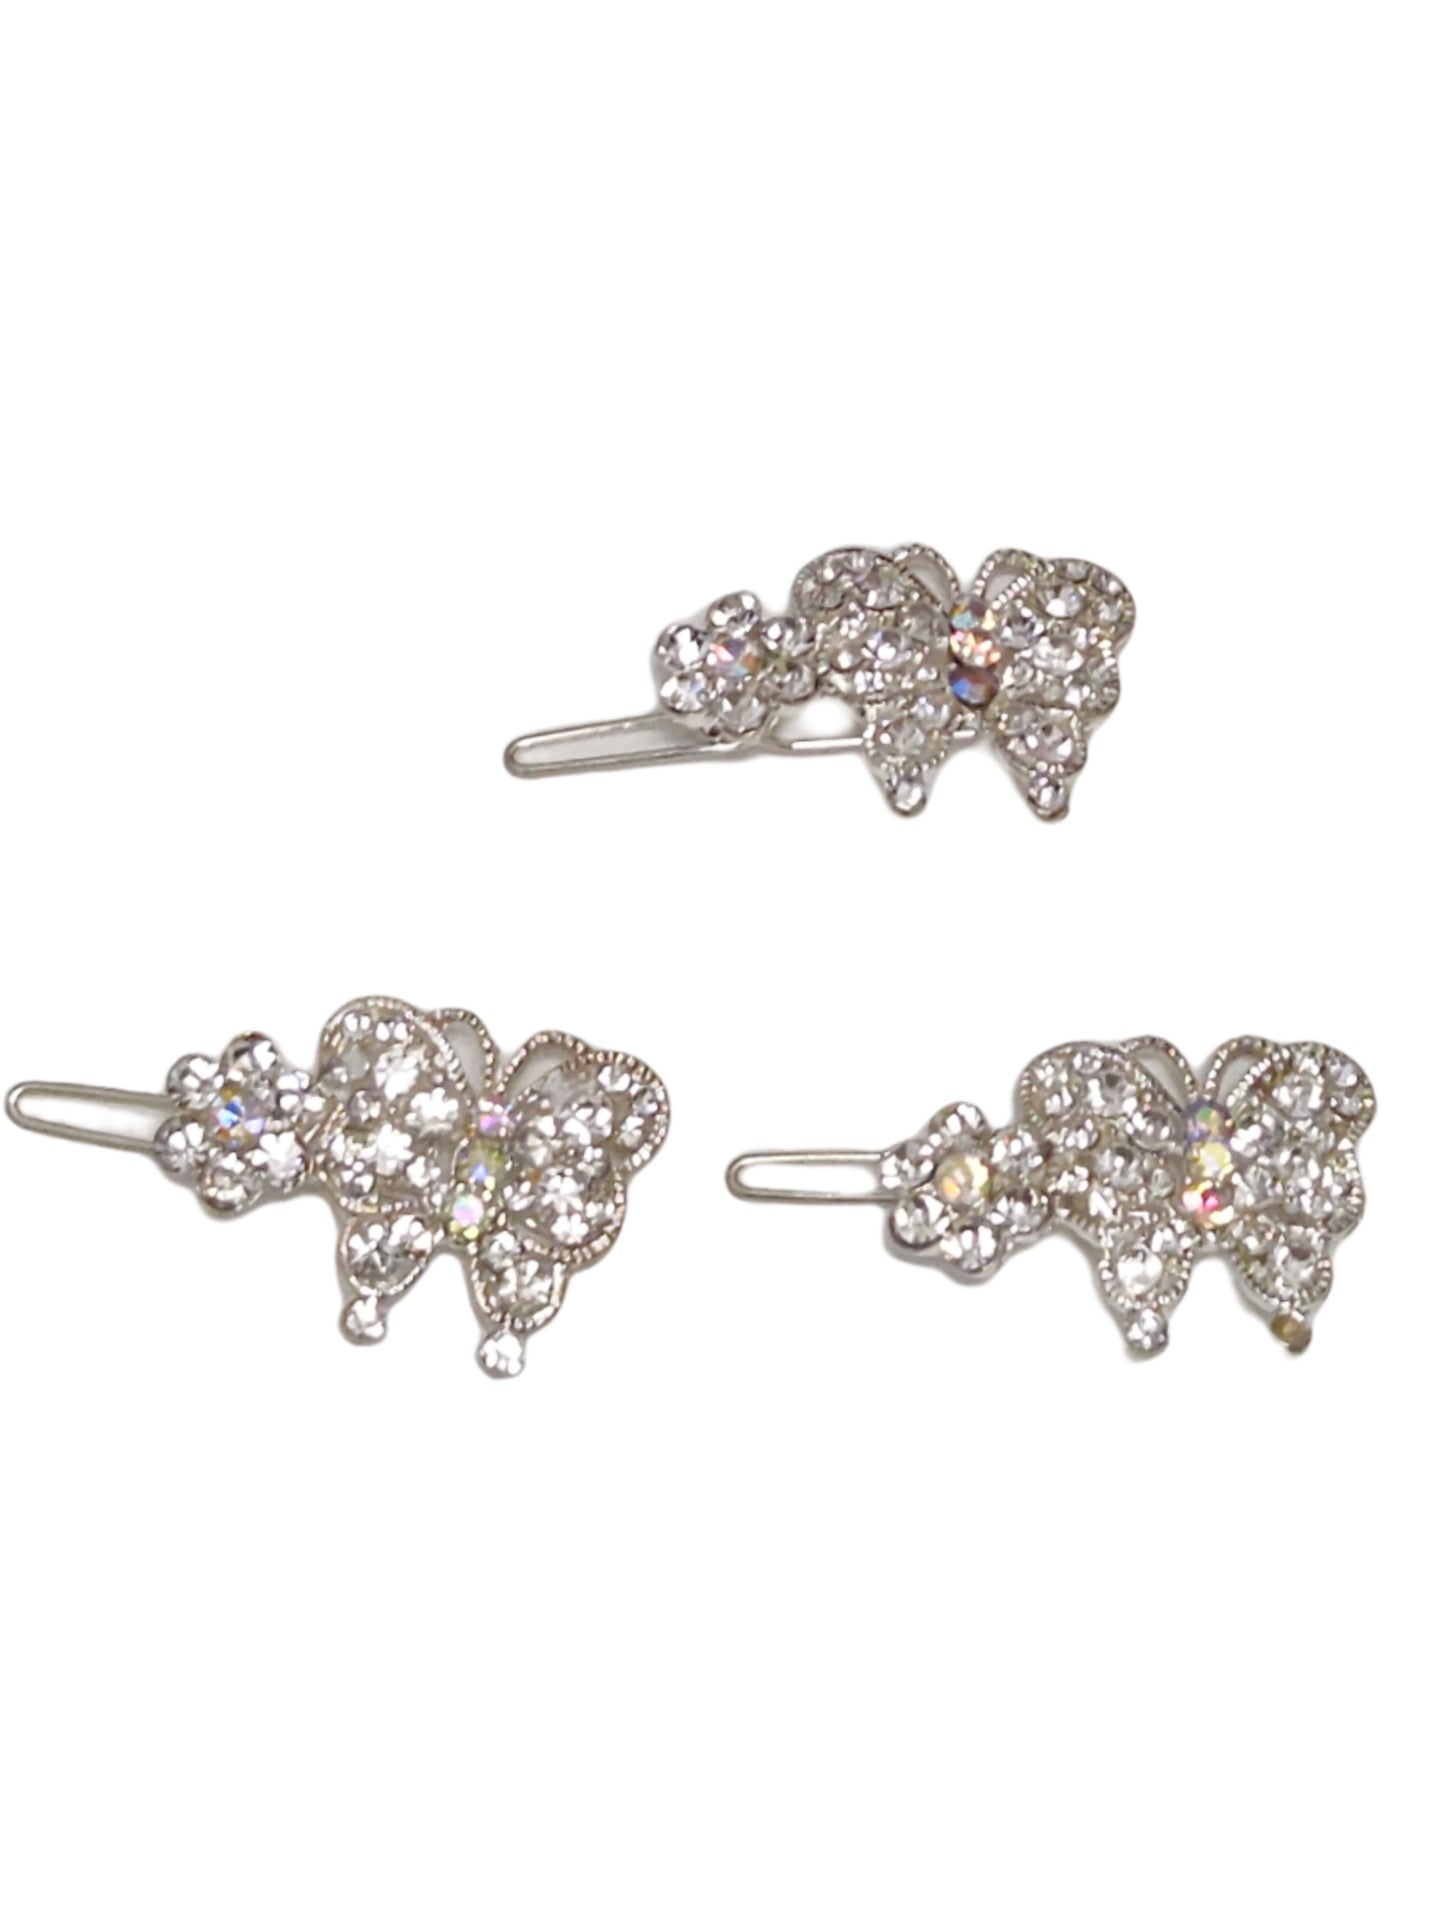 Butterfly Diamond Hair Pins | Pack of 10